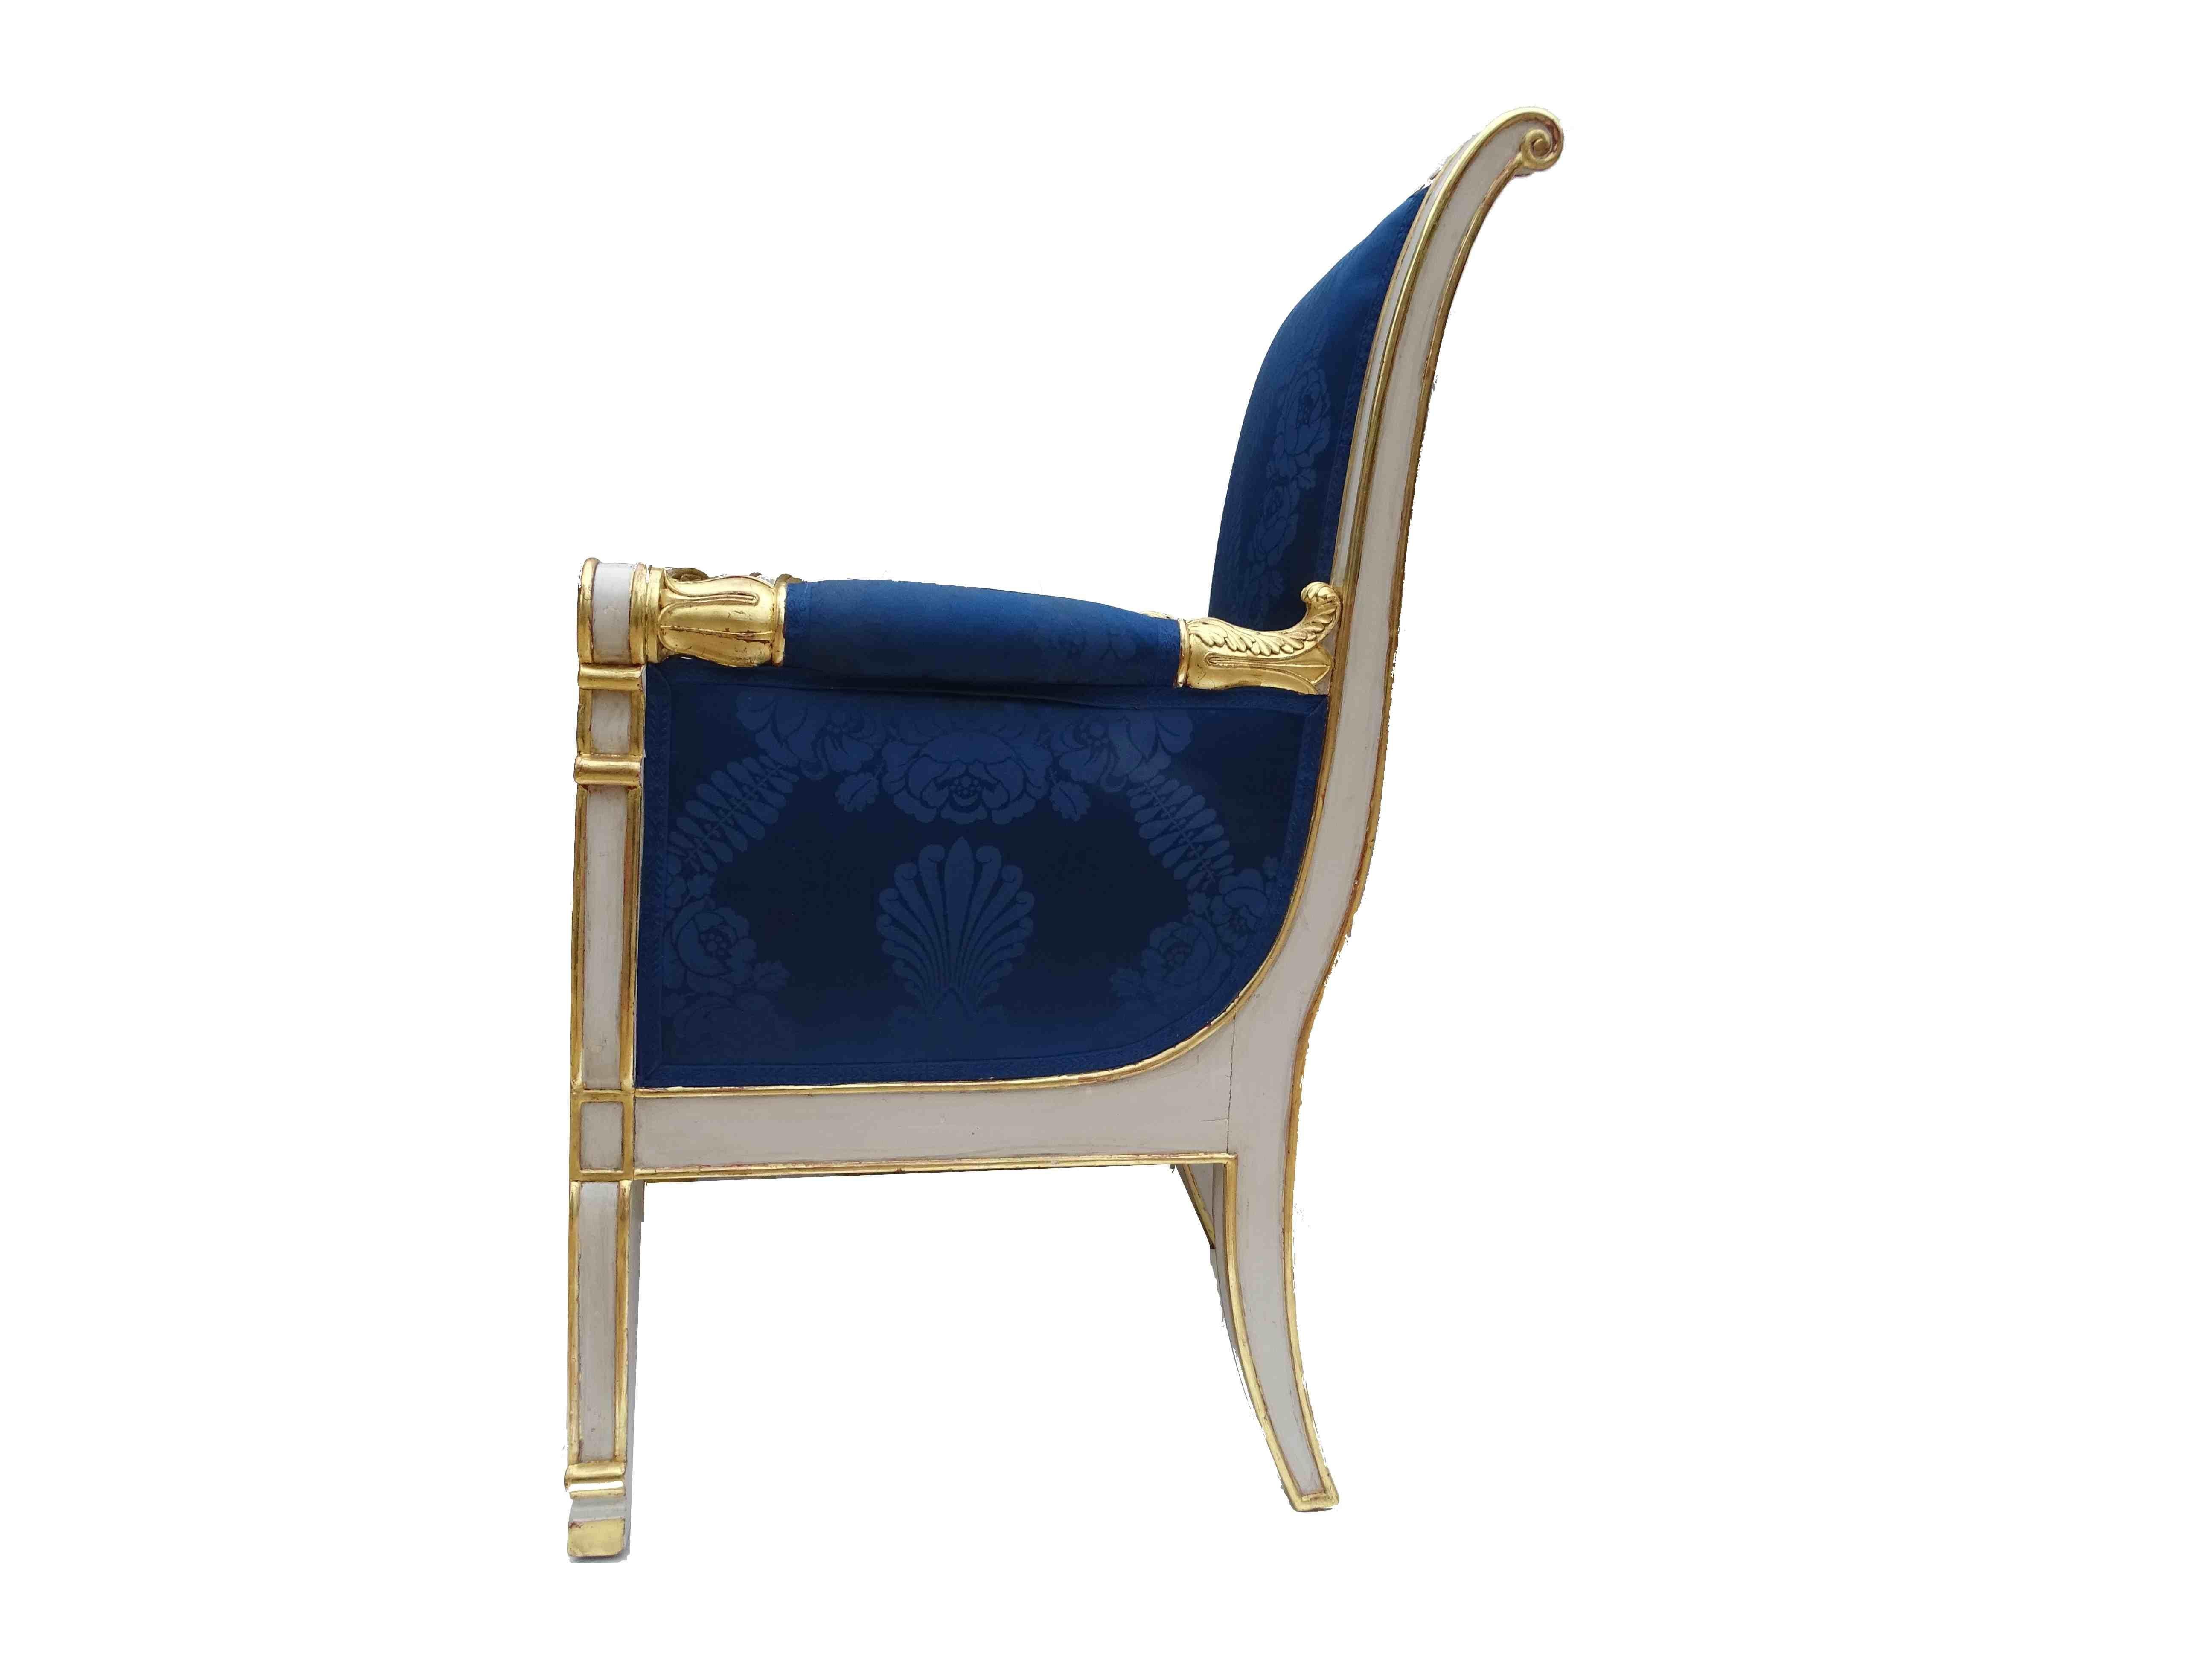 Gorgeous pair of Bergères armchairs stamped Jeanselme, Empire Restoration period early 19th circa 1825-1830 in white lacquered and giltwood.
They are upholstered in beautiful blue cotton patterned upholstery fabric.
The bergeres and the upholstery